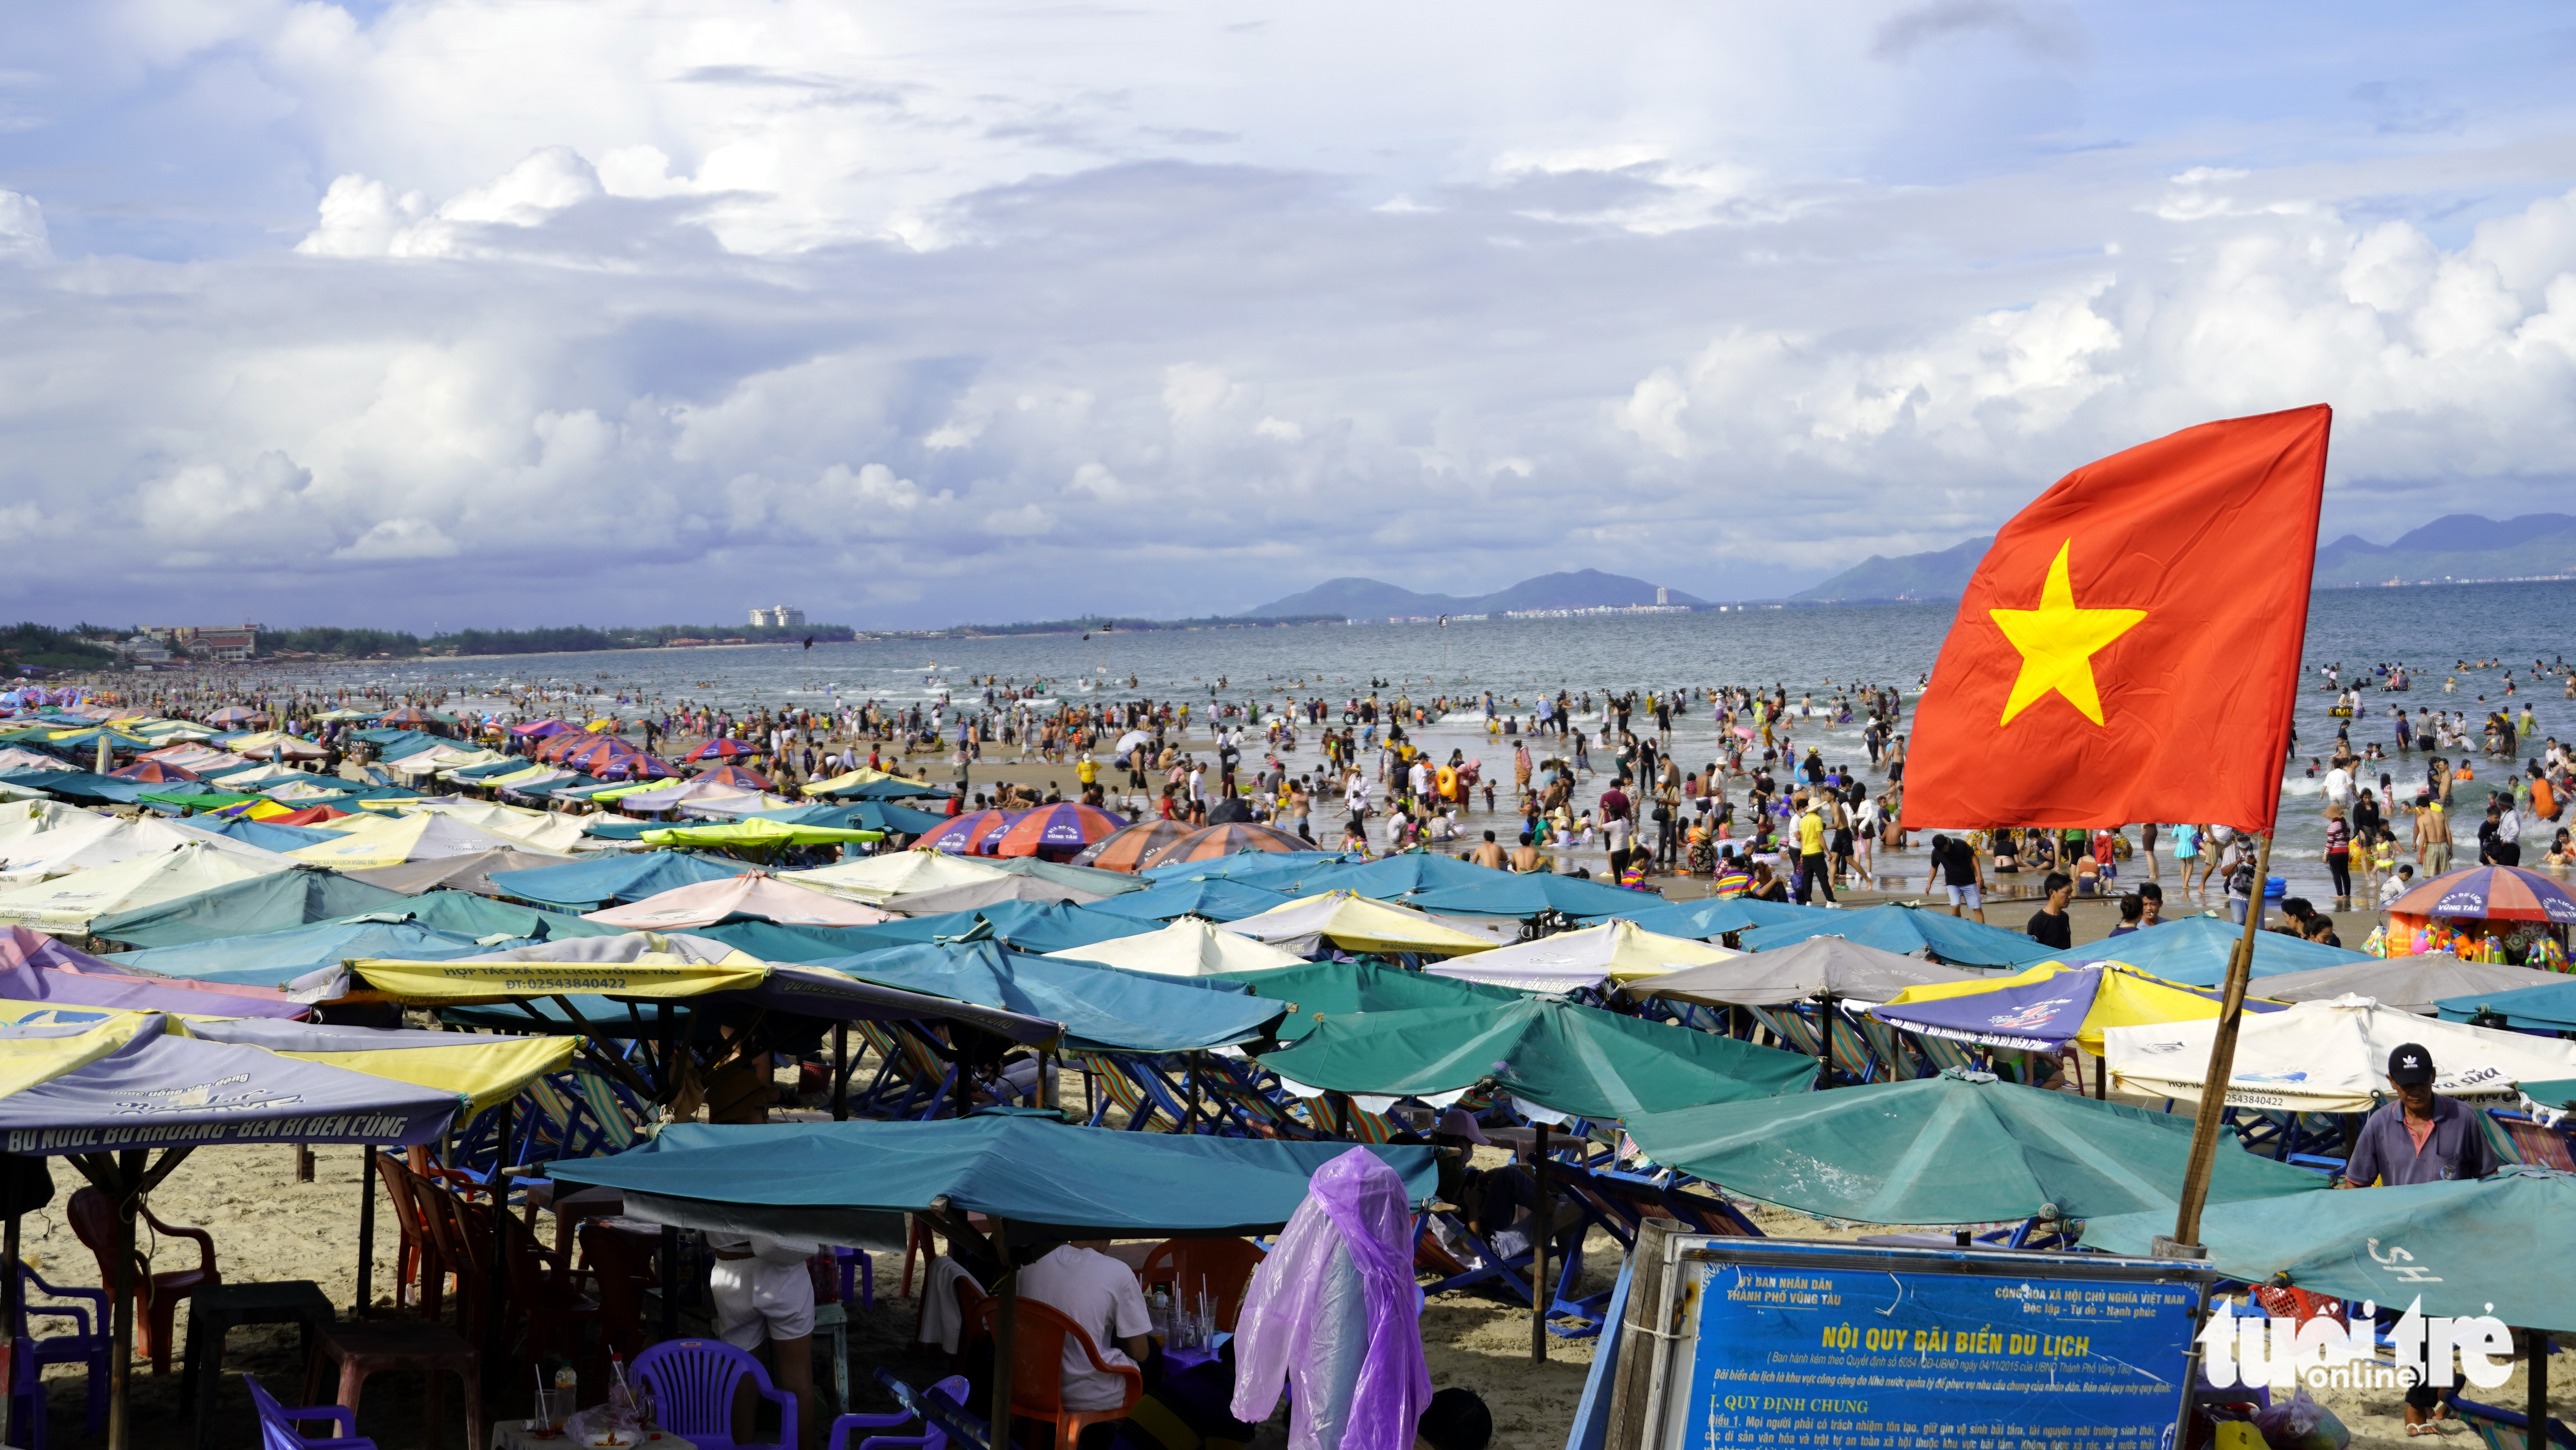 People go to a beach in Vung Tau City, Ba Ria - Vung Tau Province, Vietnam during the four-day public holiday marking Reunification Day (April 30) and International Workers’ Day (May 1) in 2022. Photo: Dong Ha / Tuoi Tre